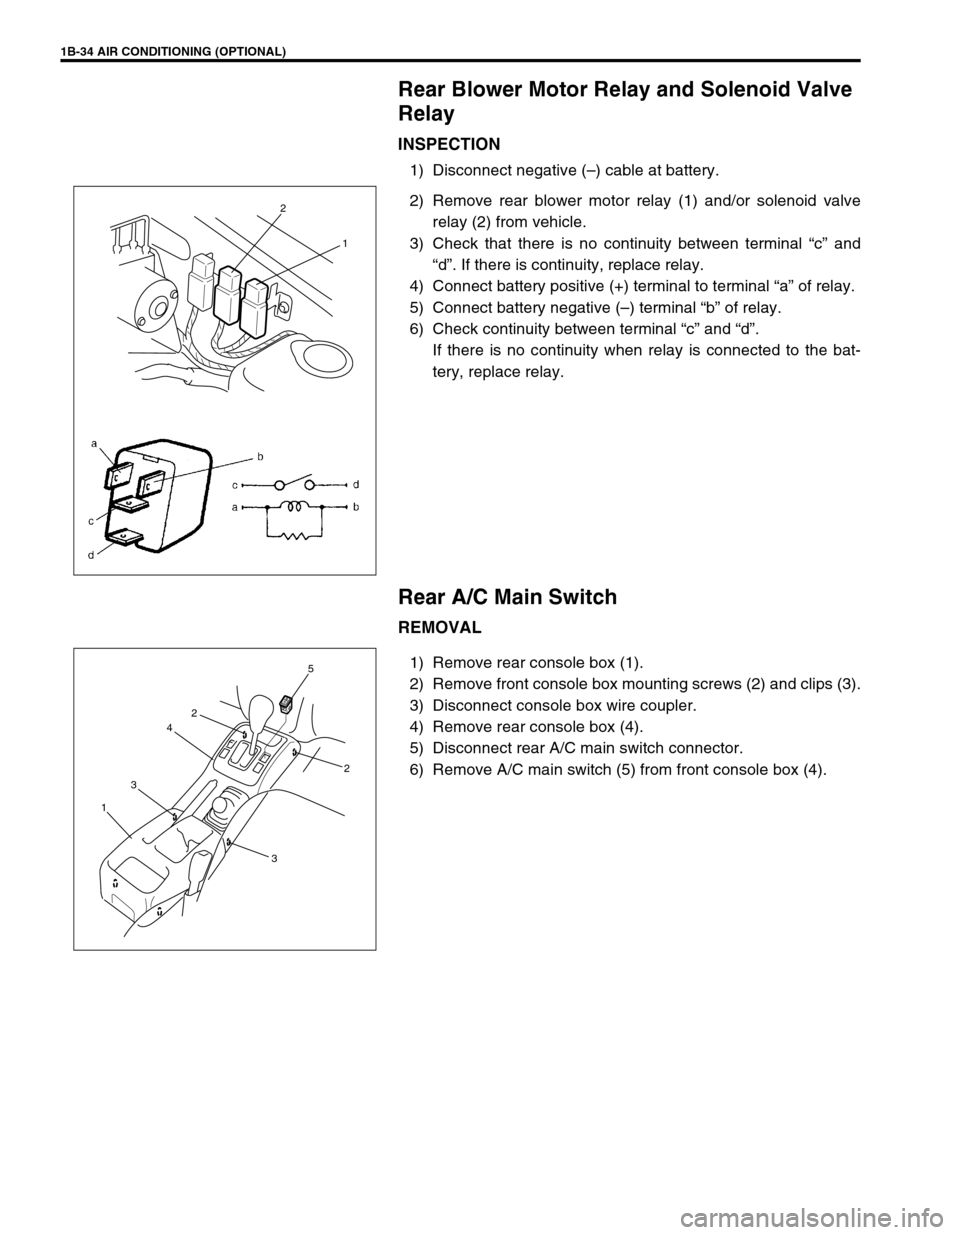 SUZUKI GRAND VITARA 2001 2.G User Guide 1B-34 AIR CONDITIONING (OPTIONAL)
Rear Blower Motor Relay and Solenoid Valve 
Relay
INSPECTION
1) Disconnect negative (–) cable at battery.
2) Remove rear blower motor relay (1) and/or solenoid valv